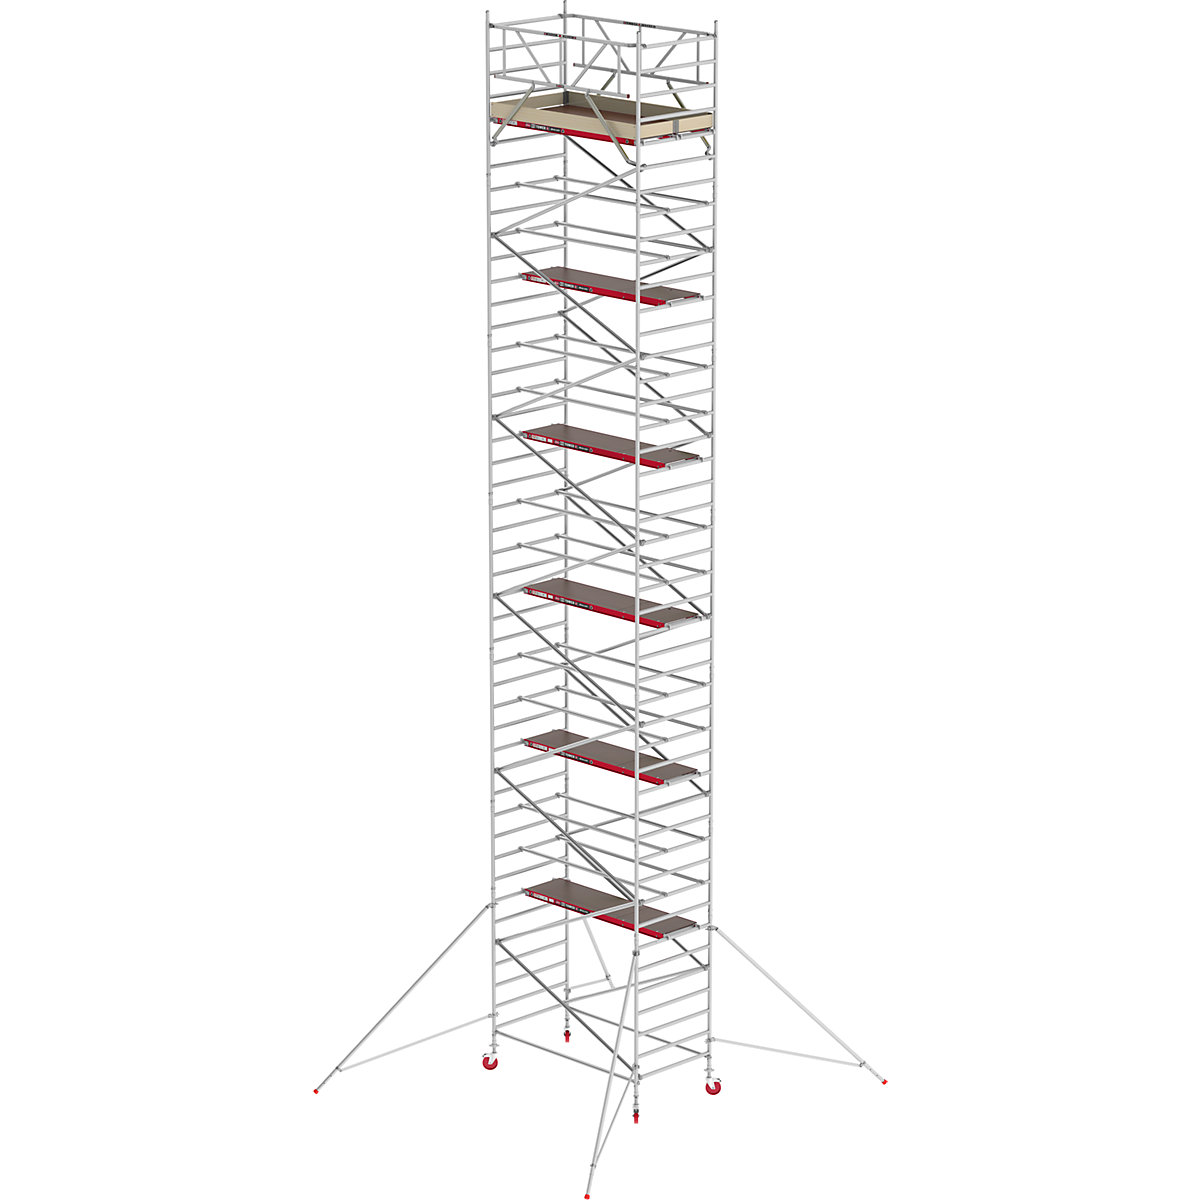 RS TOWER 42 wide mobile access tower – Altrex, wooden platform, length 1.85 m, working height 14.20 m-7